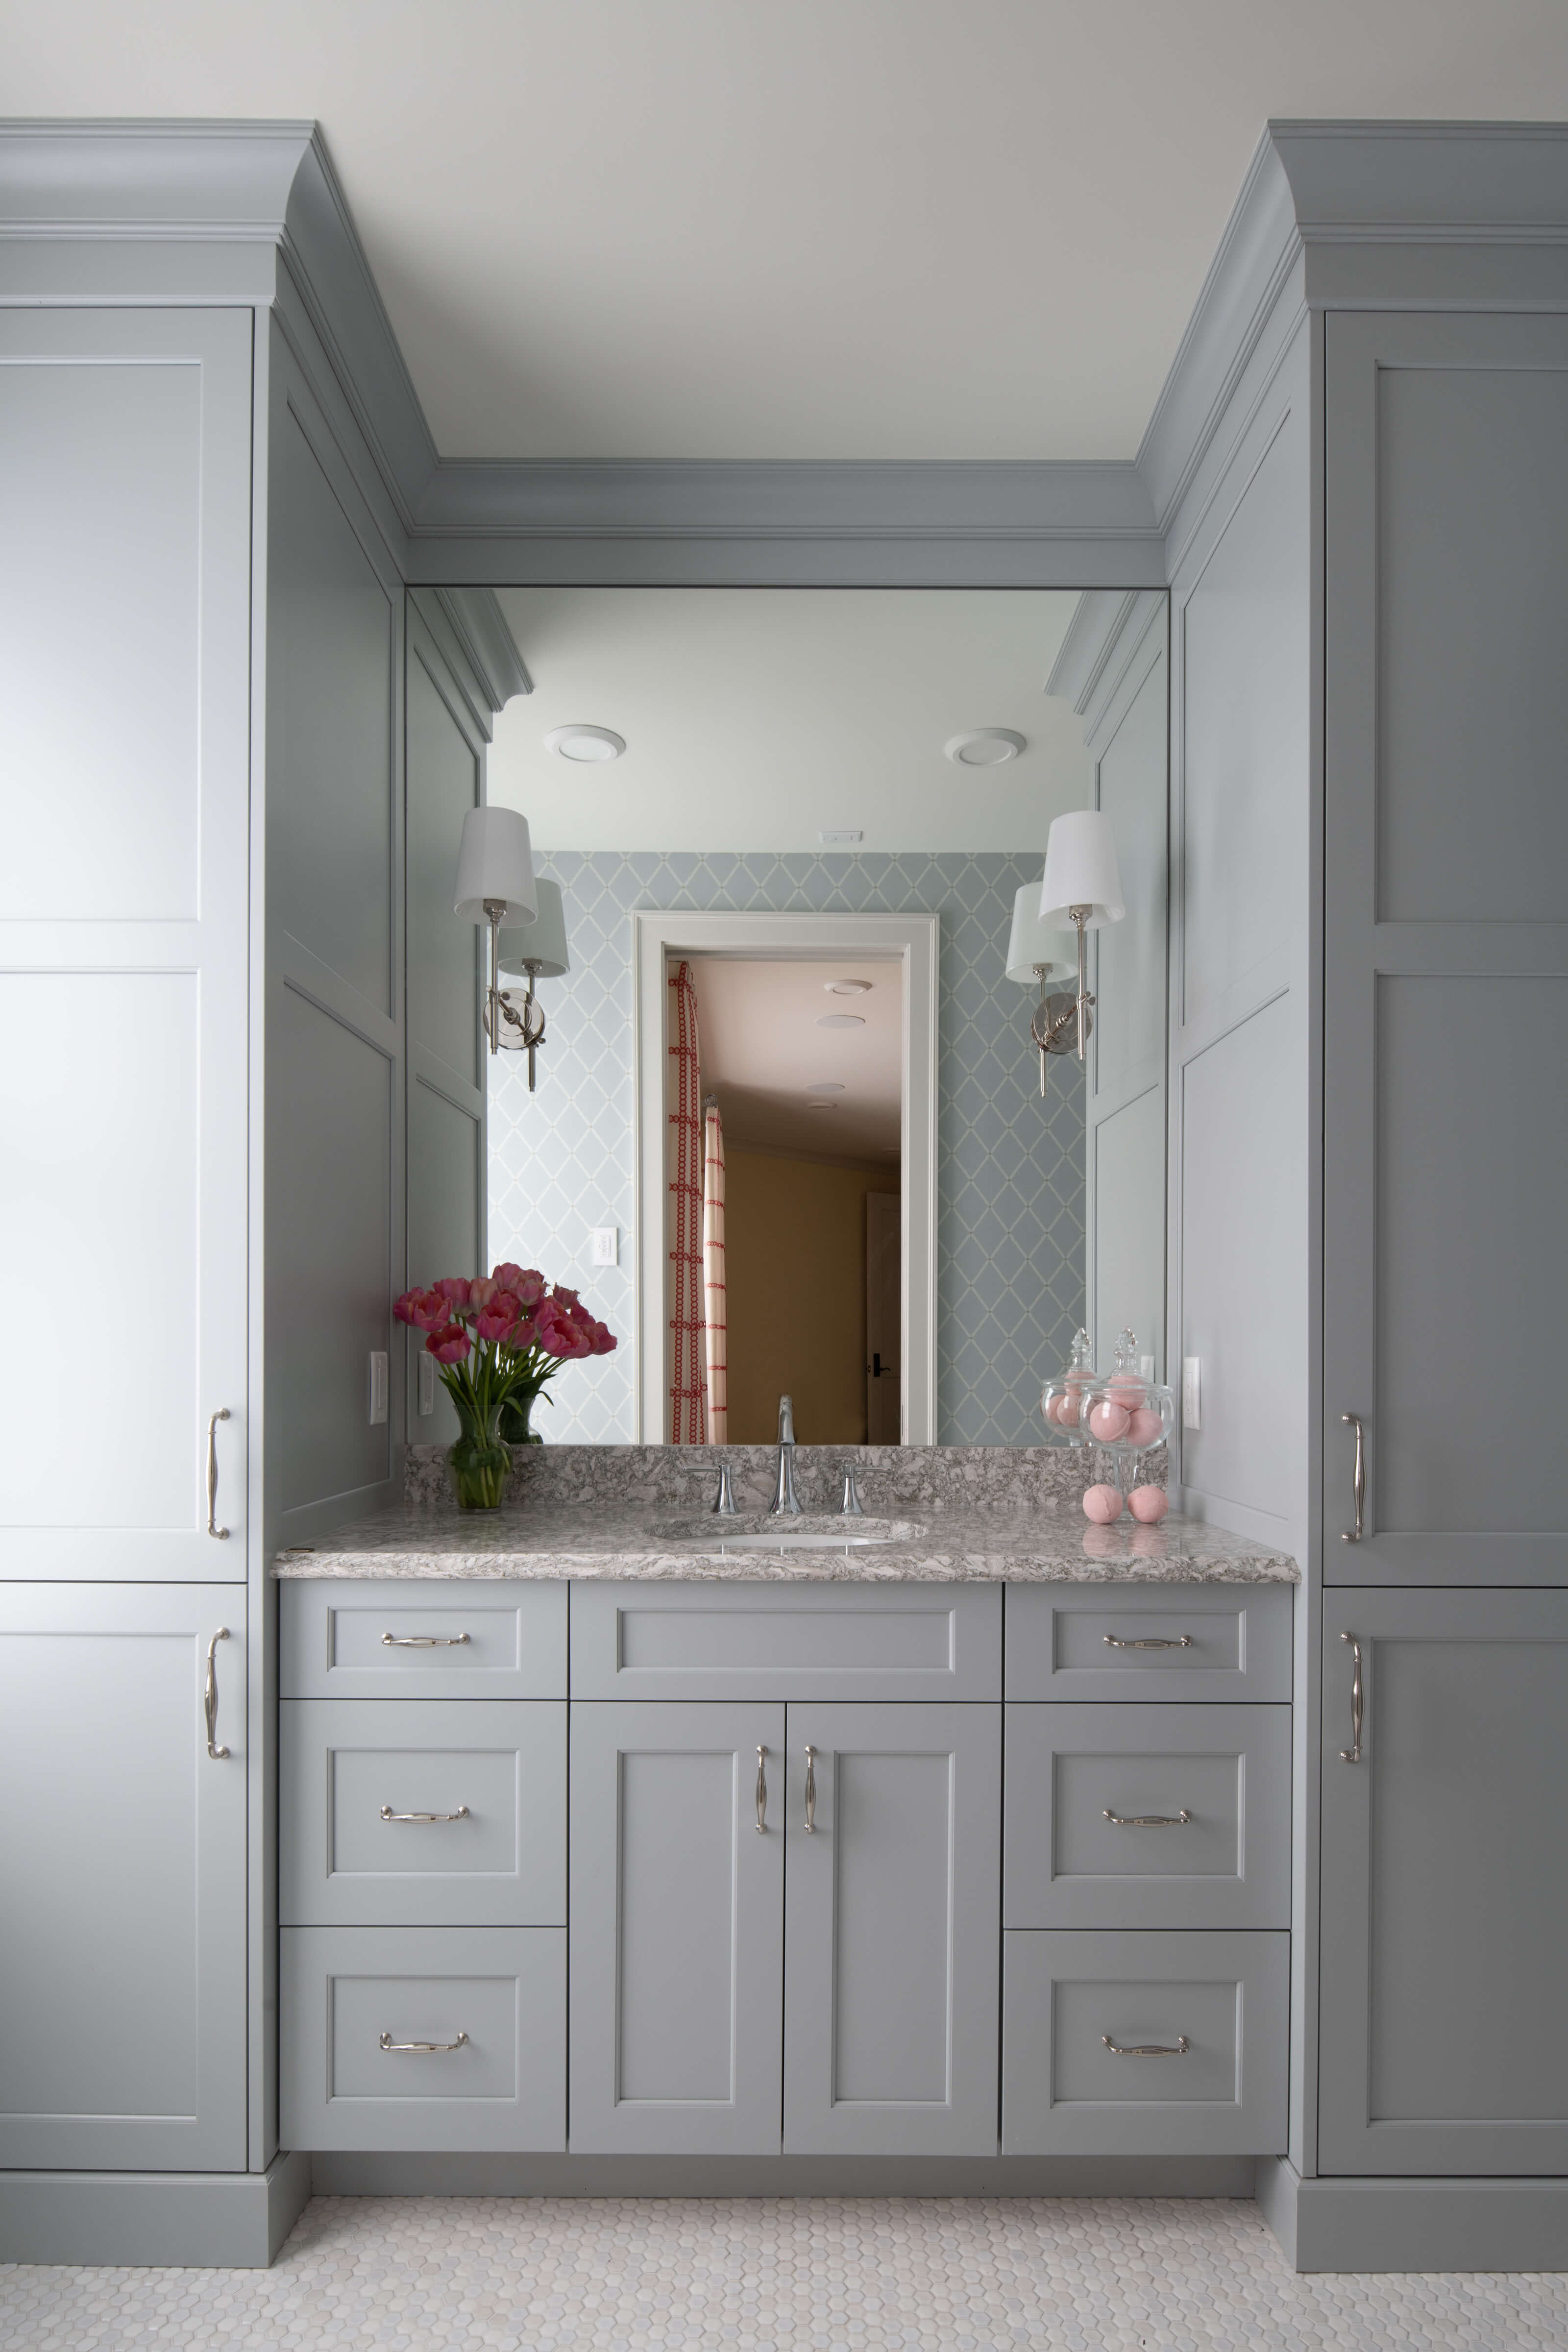 A soft, light gray painted bathroom vanity with two tall linen cabinet towers on both sides of the vanity creating a very symmetrical design.